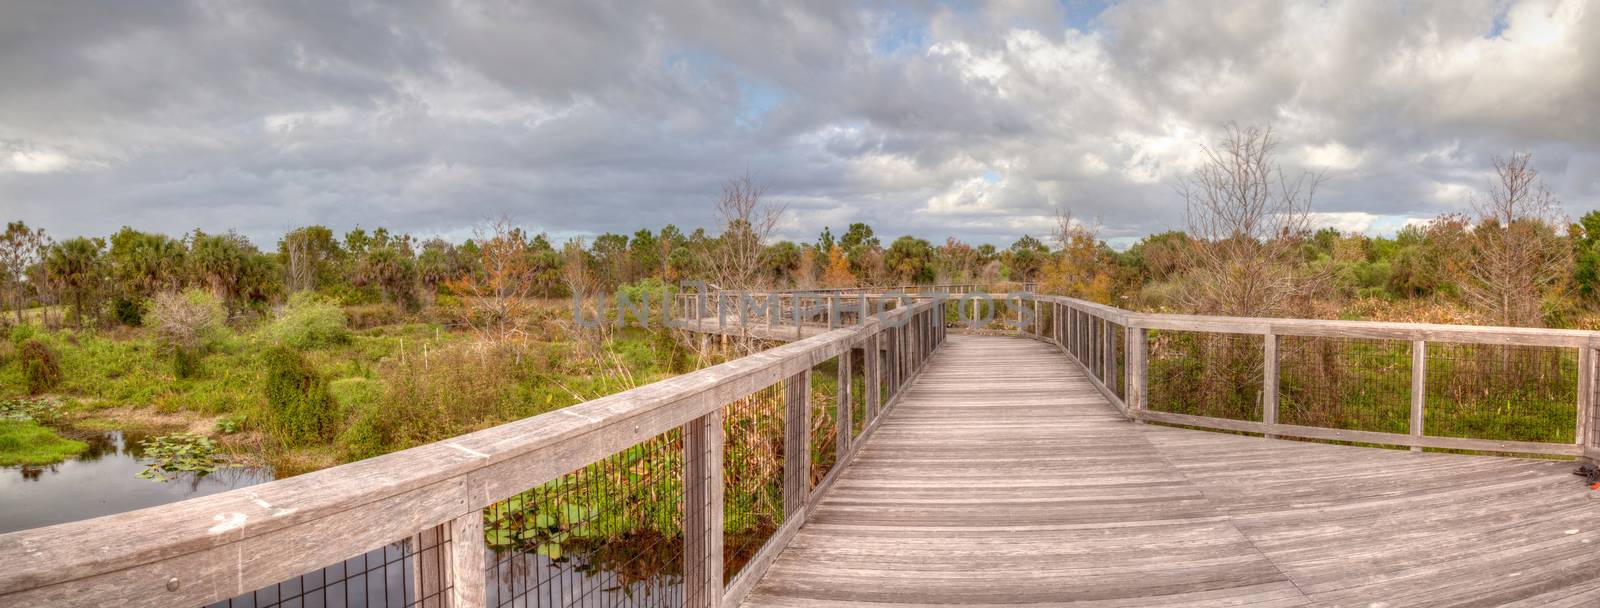 Wooden secluded, tranquil boardwalk along a marsh pond in Freedom Park in Naples, Florida